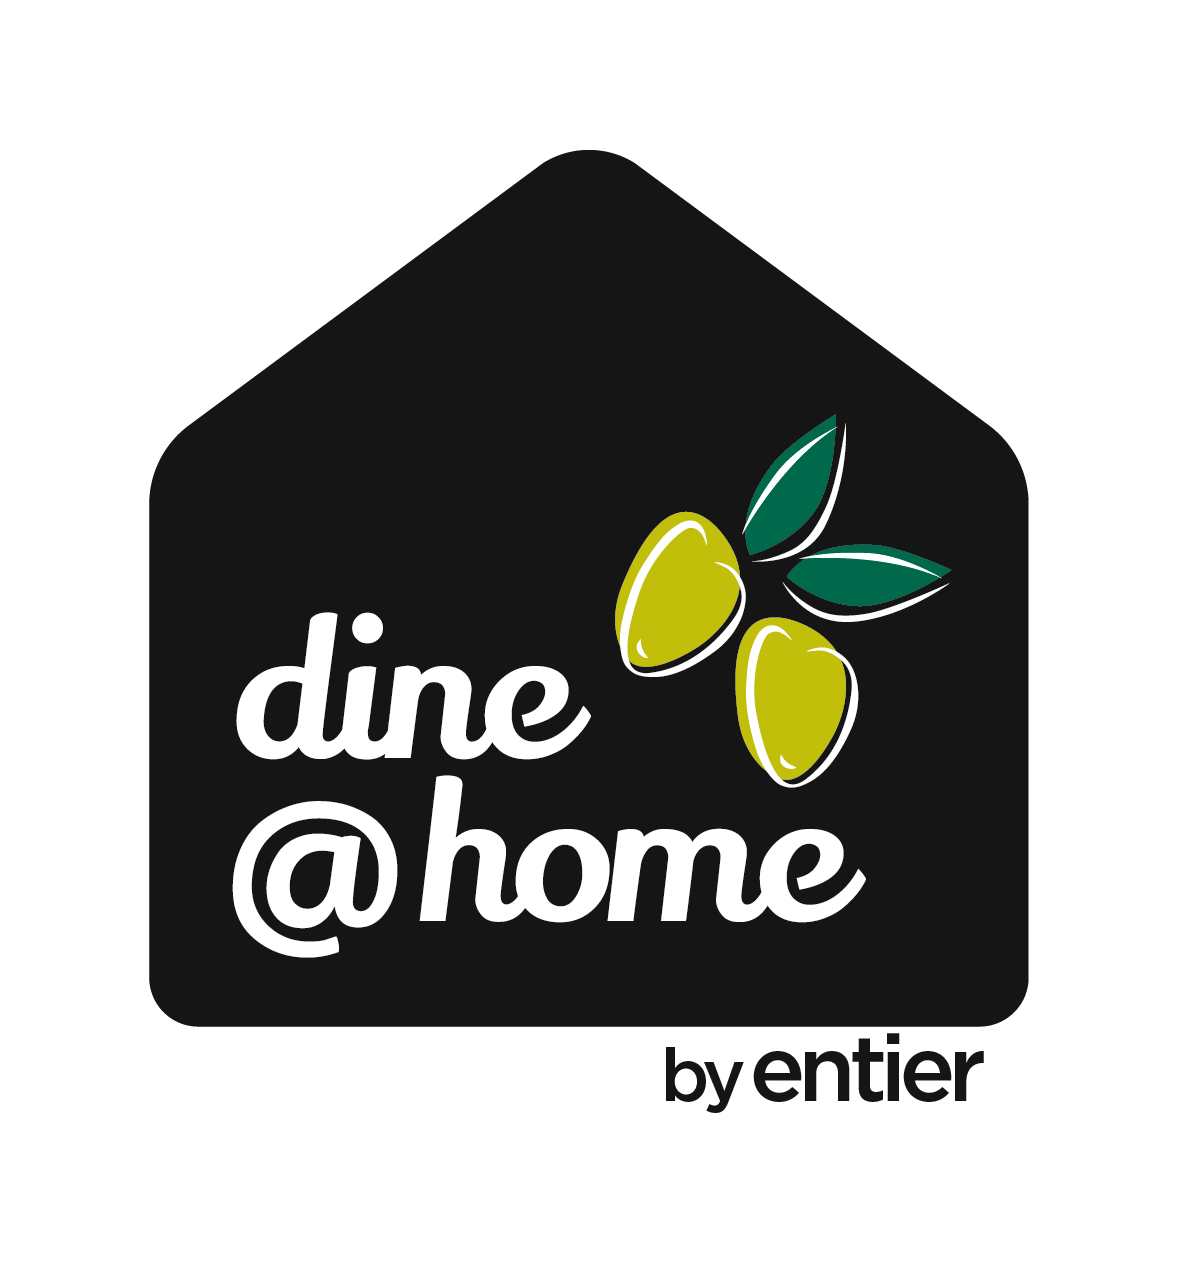 dine at home by entier logo